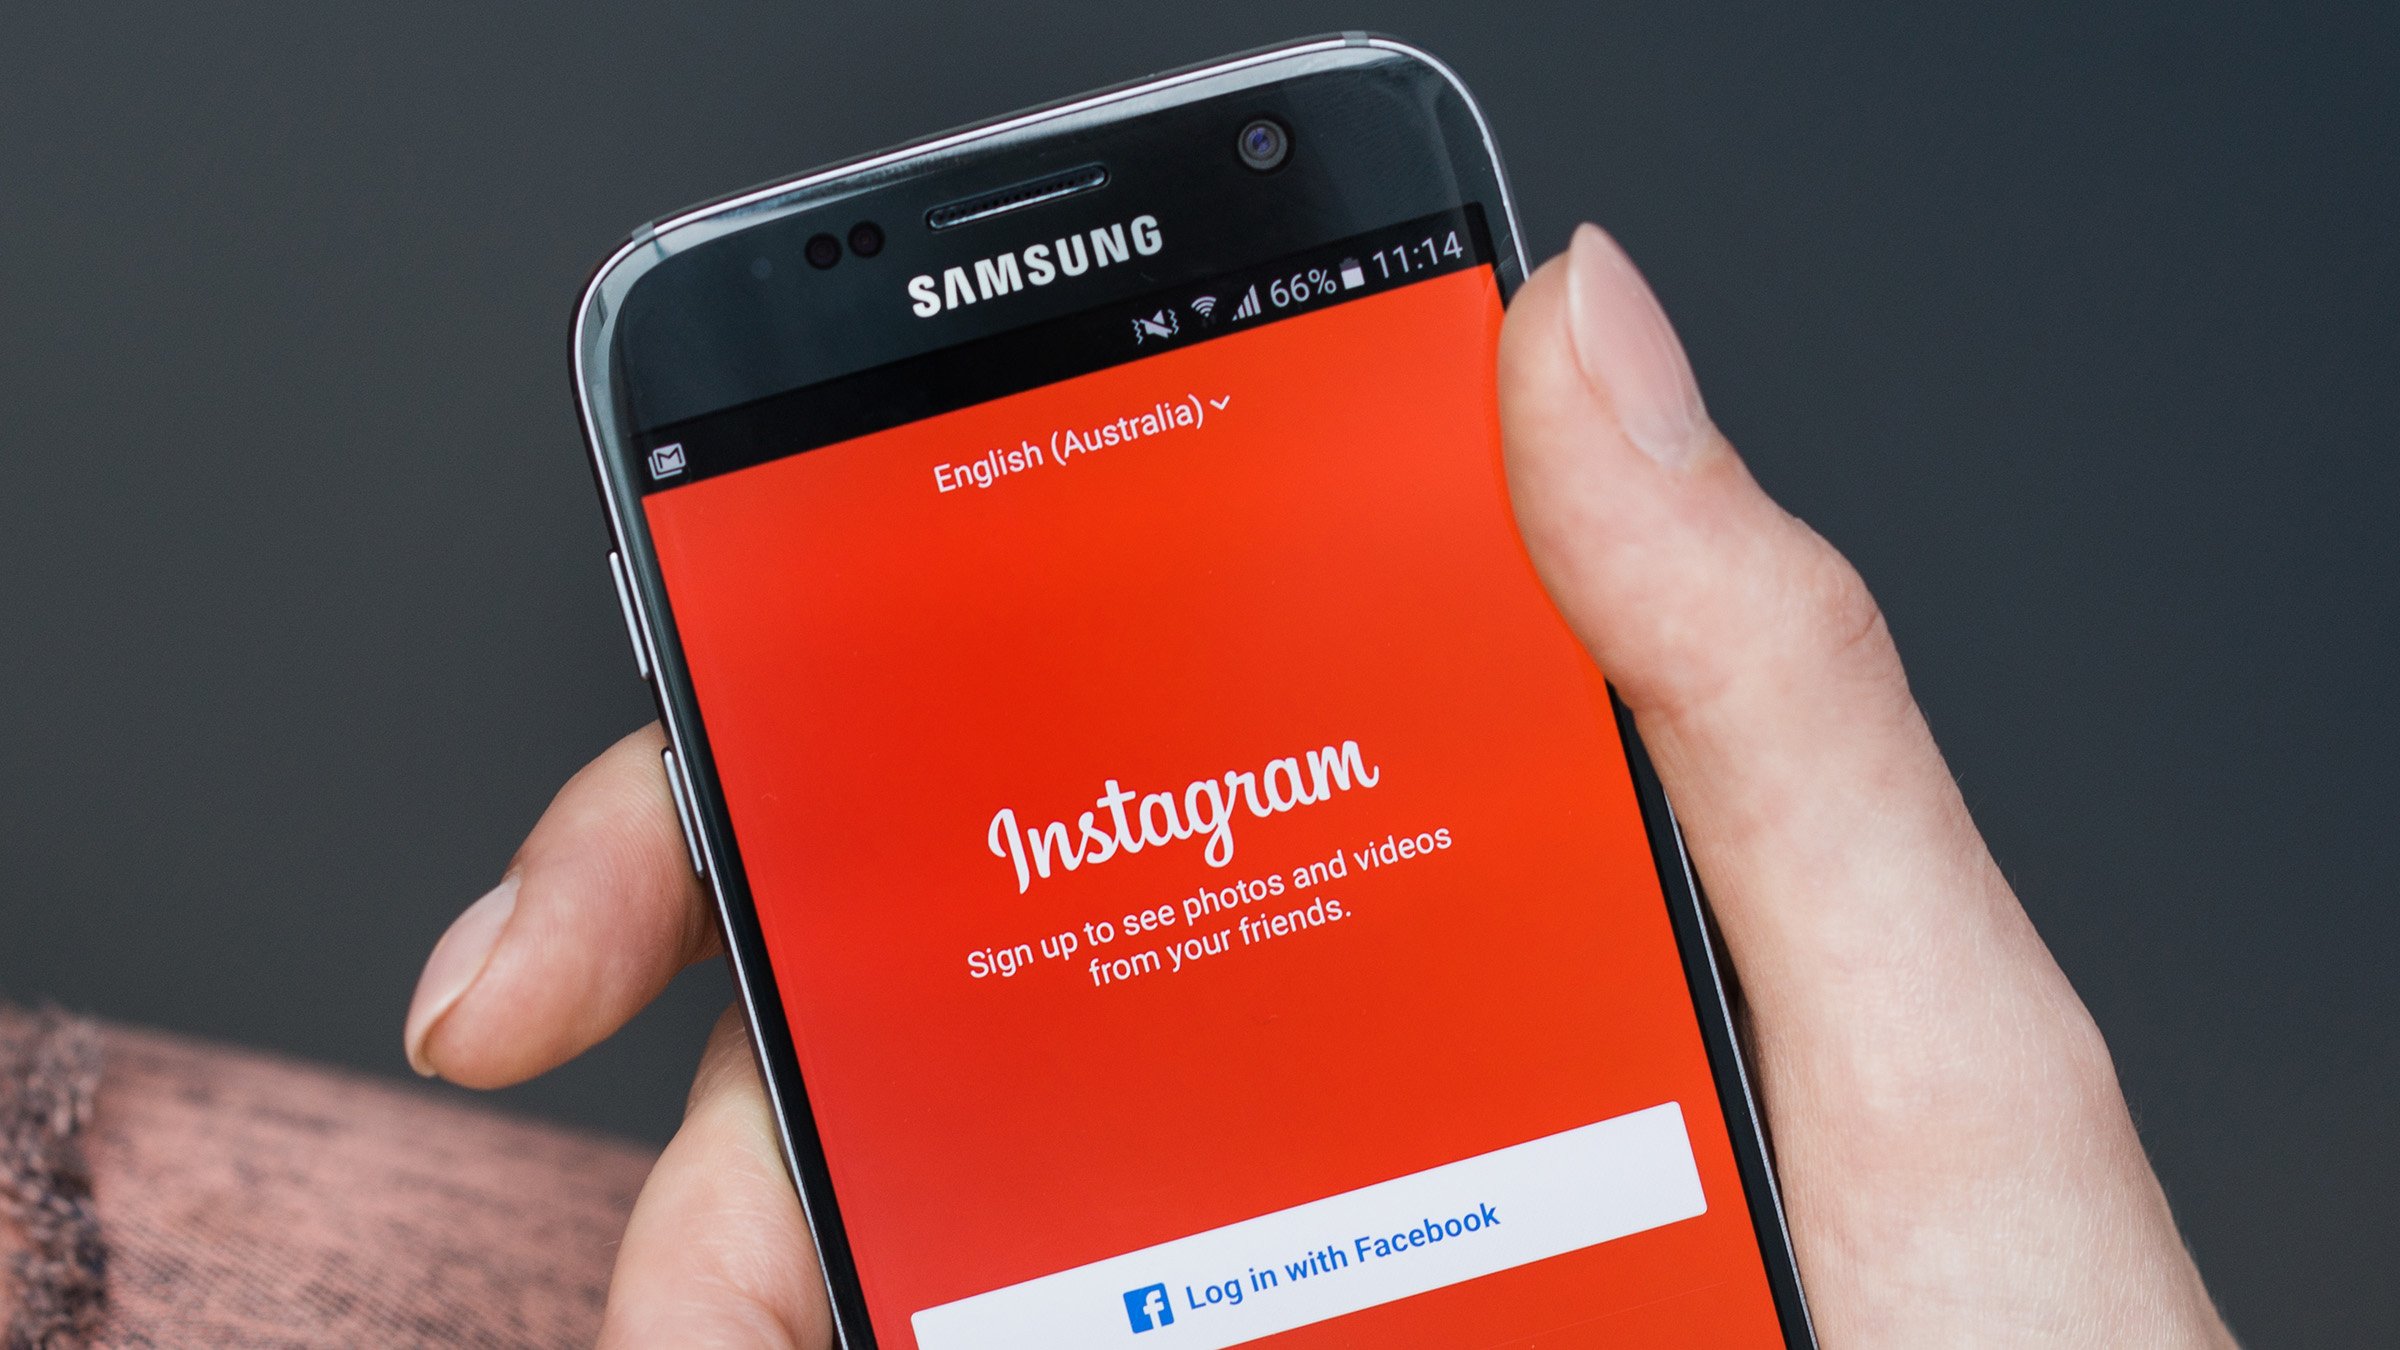 Instagram update news all the latest features detailed NextPit